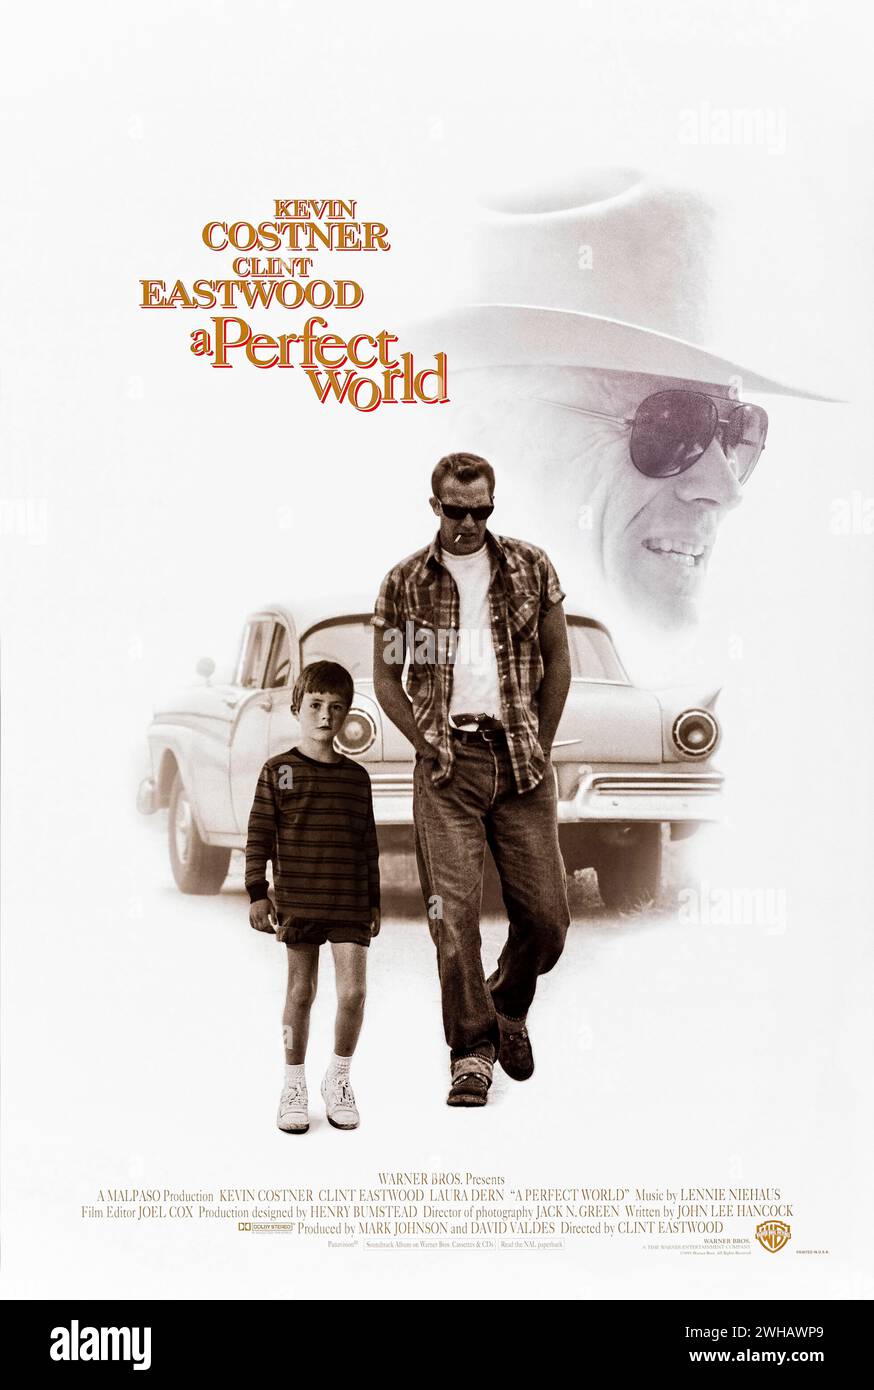 A Perfect World (1993) directed by Clint Eastwood and starring Kevin Costner, Clint Eastwood and Laura Dern. A kidnapped boy strikes up a friendship with his captor, an escaped convict on the run from the law, while the search for him continues. Photograph of an original 1993 US one sheet poster. ***EDITORIAL USE ONLY*** Credit: BFA / Warner Bros Stock Photo